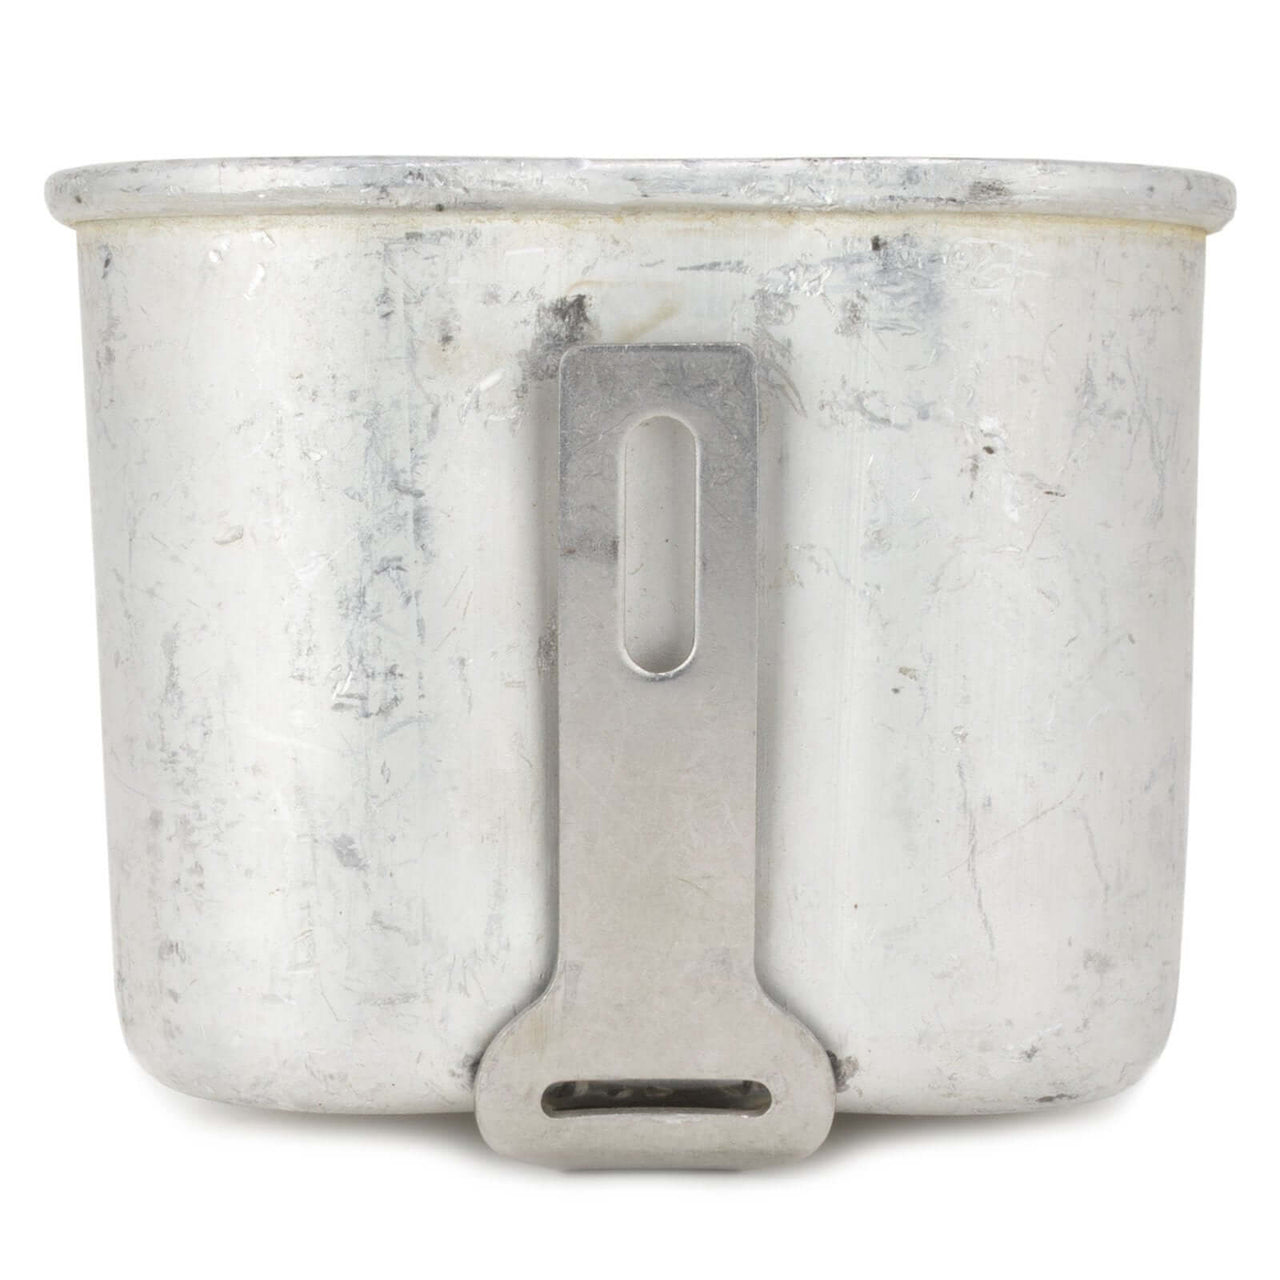 Authentic Belgian Army Canteen Cup (Used)